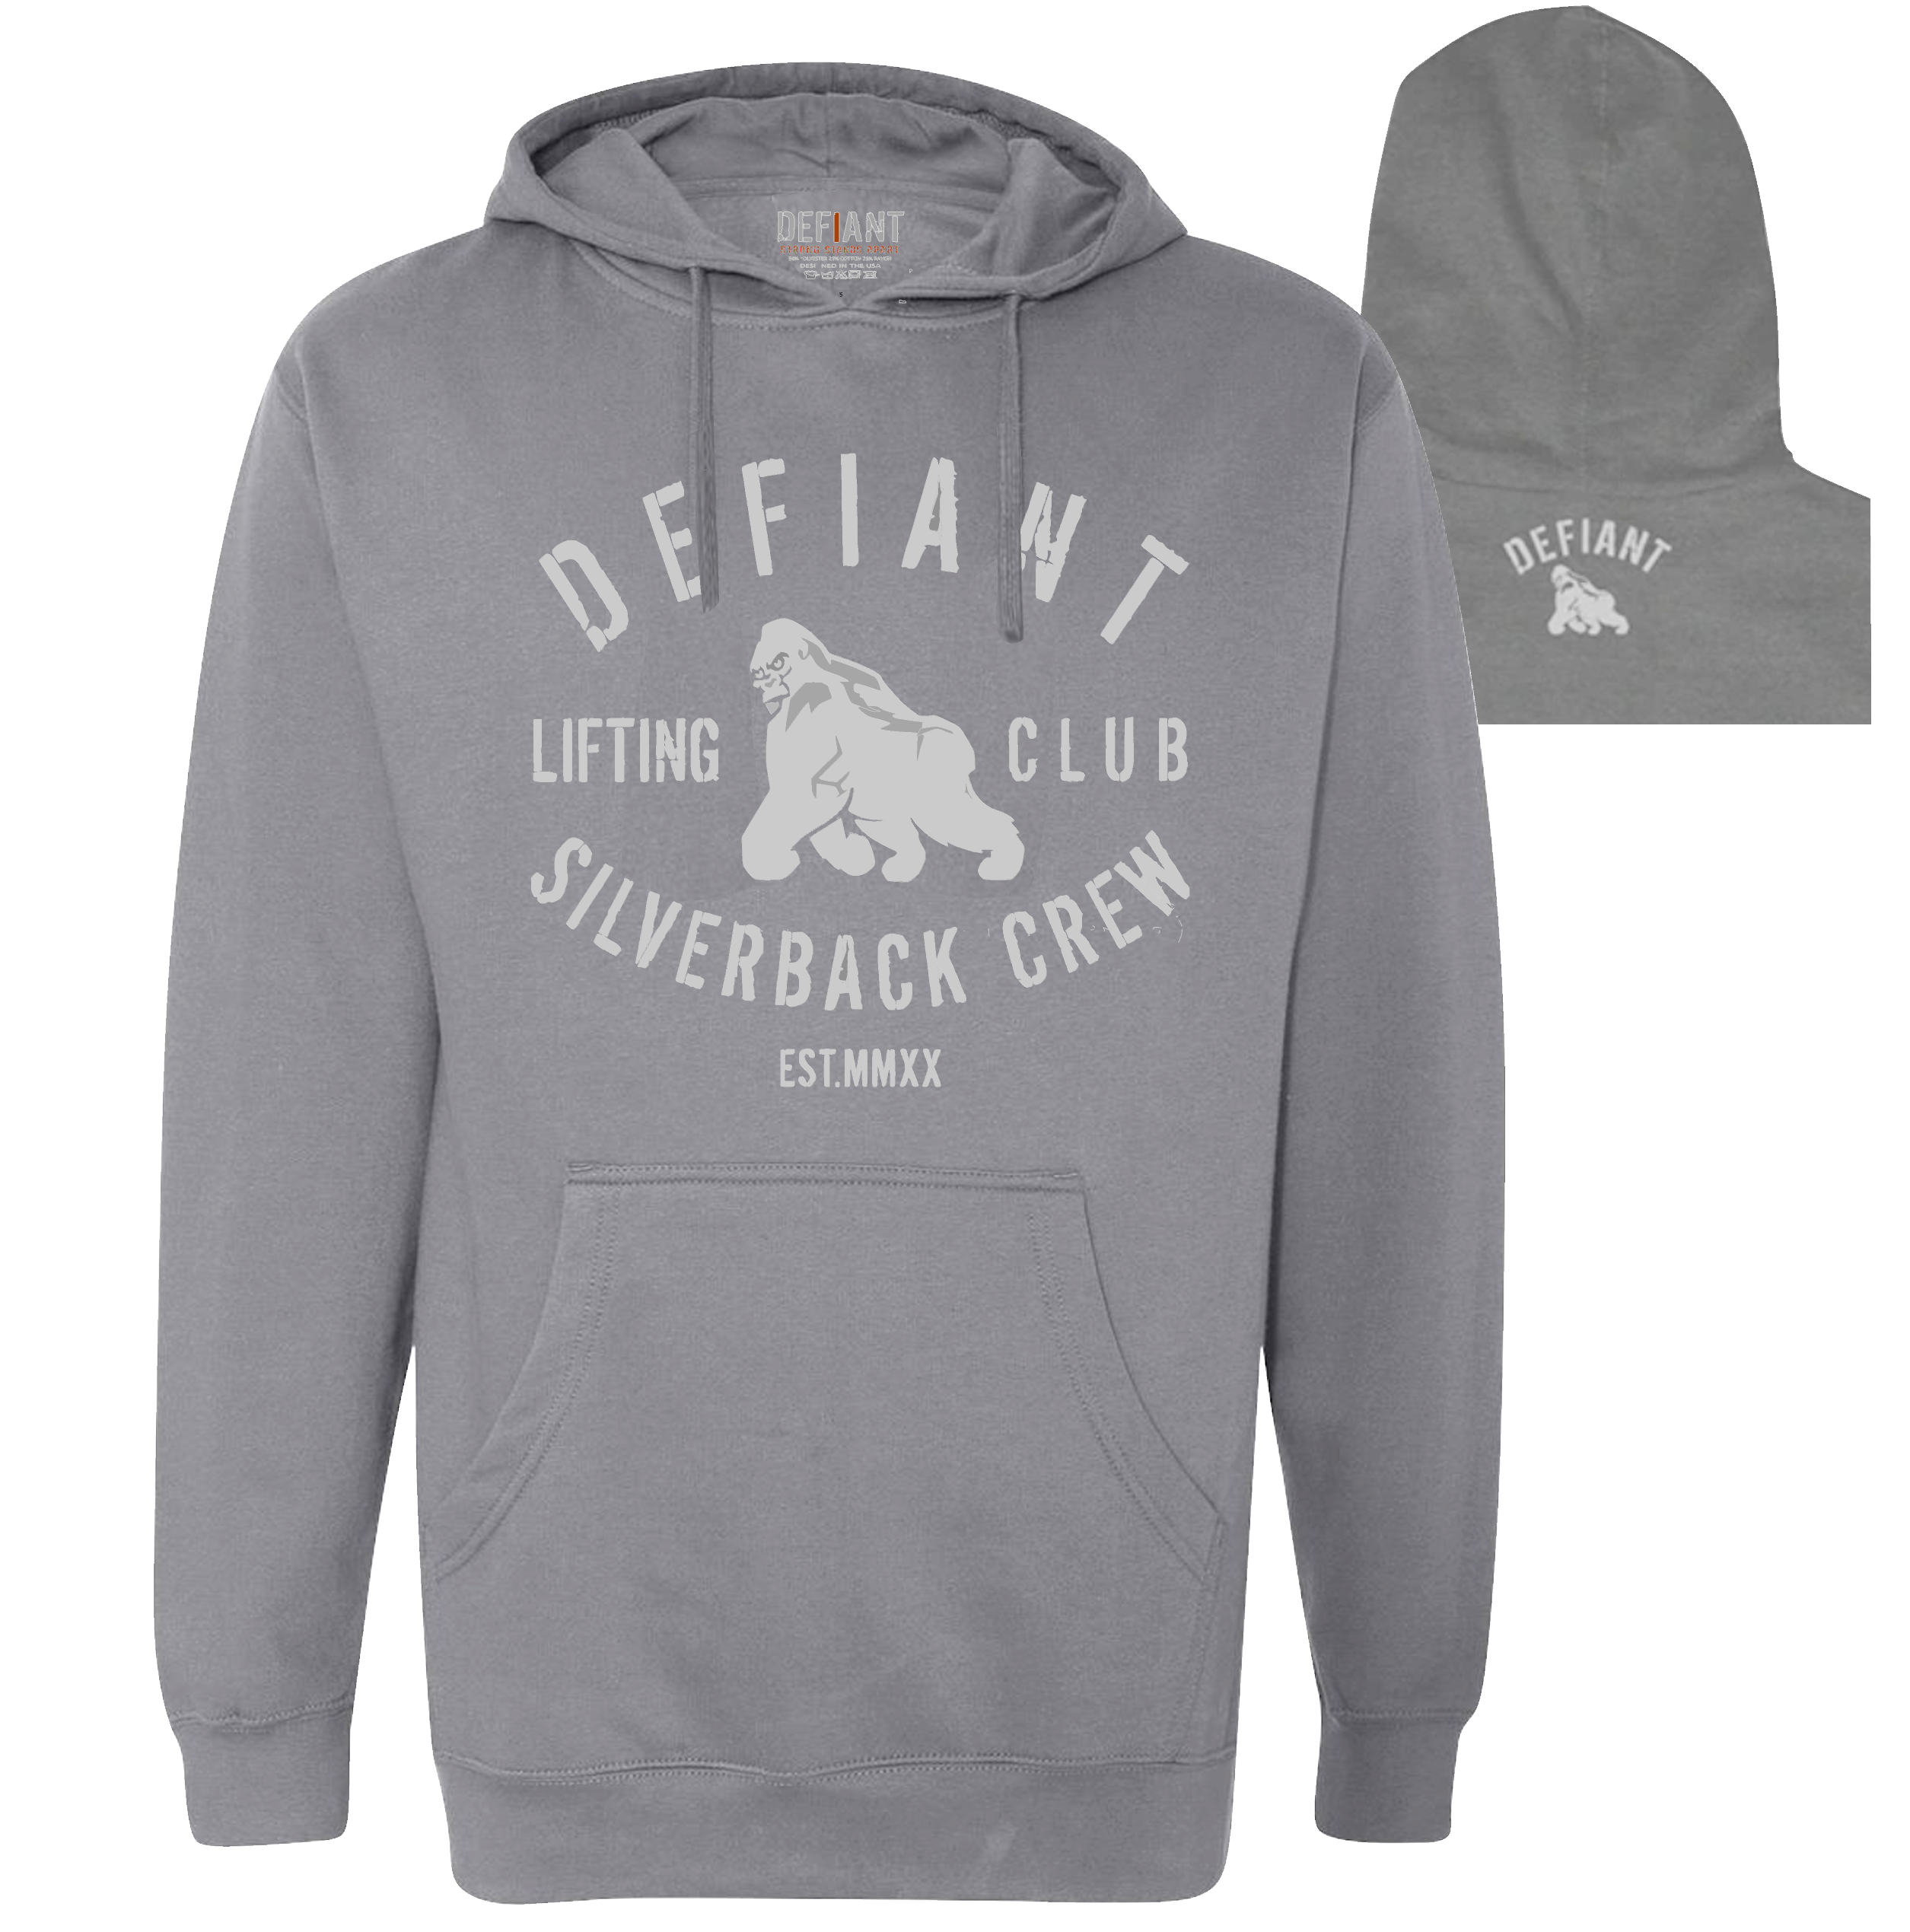 NEW - SILVER SILVERBACK MIDWEIGHT HOODIE - GUNMETAL GRAY - LIMITED SIZES